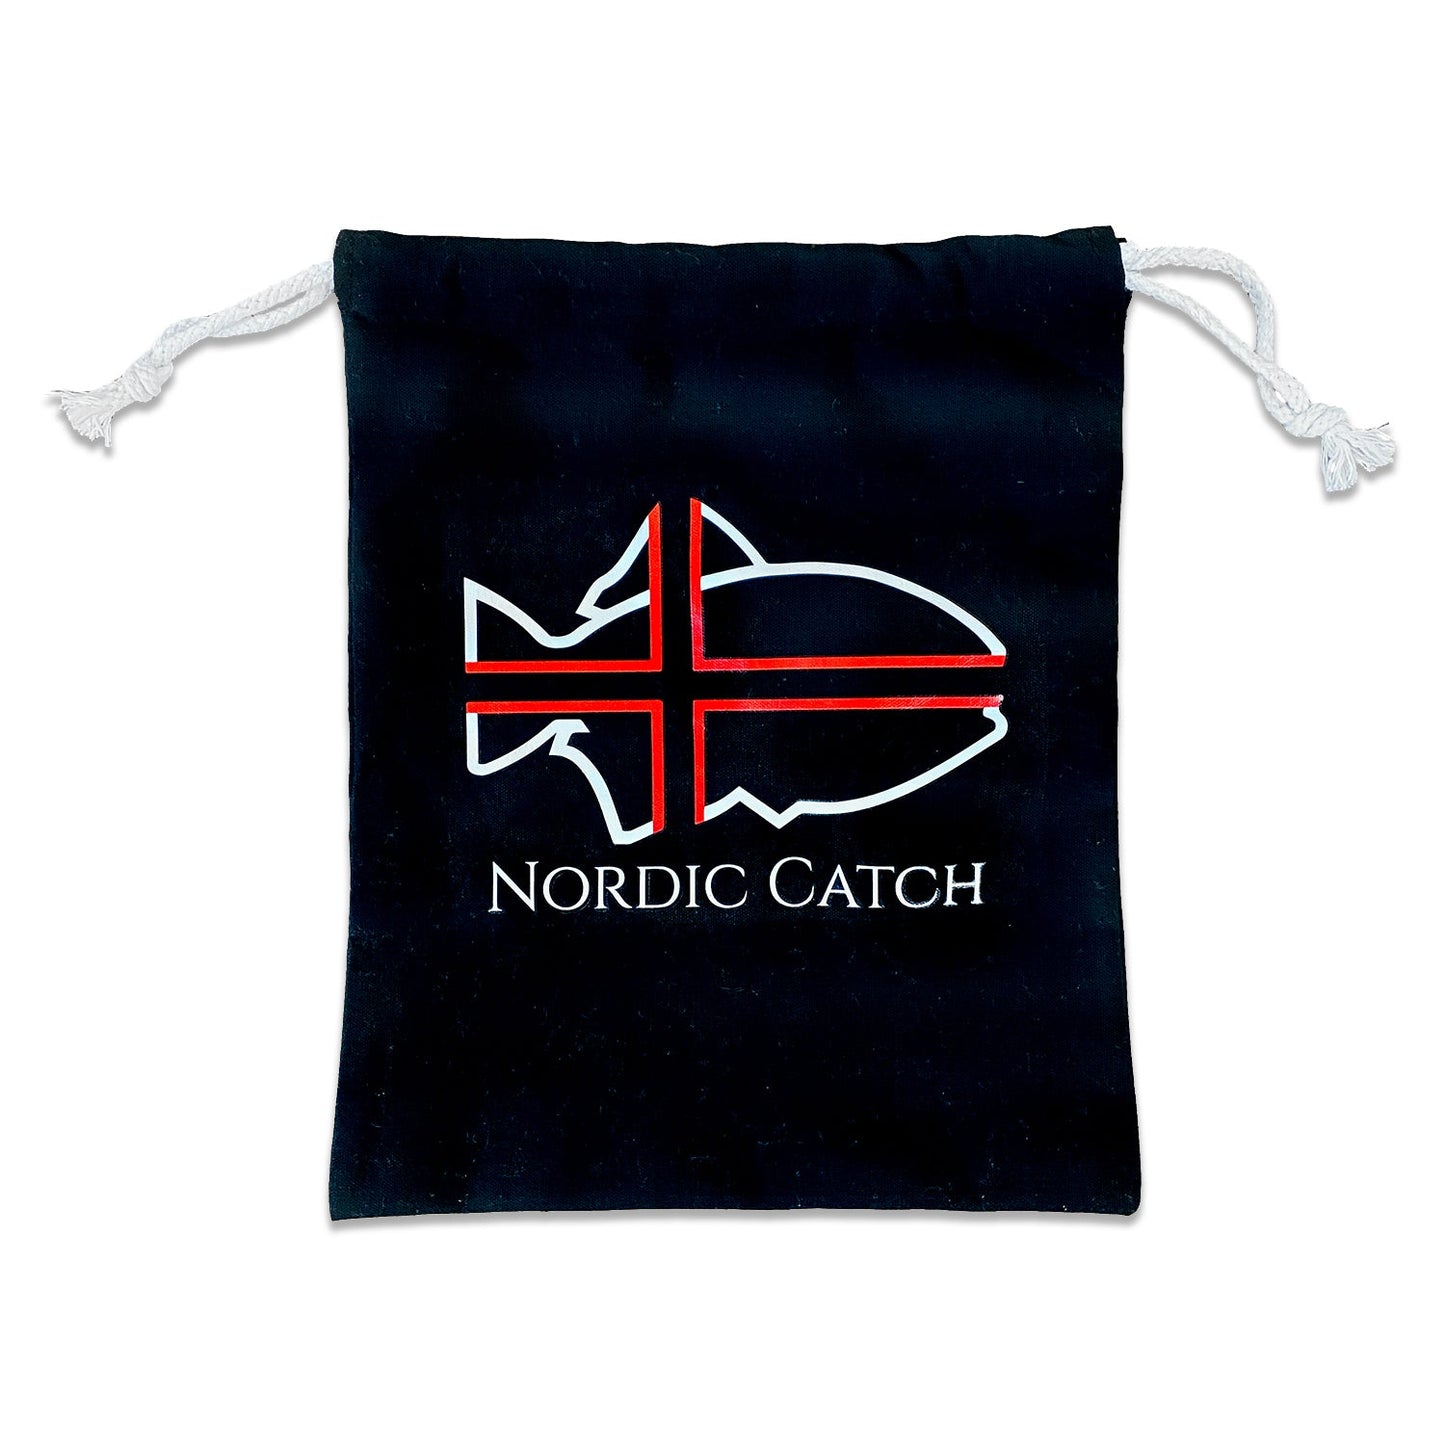 Perfect Poke Kit for 2 - Nordic Catch